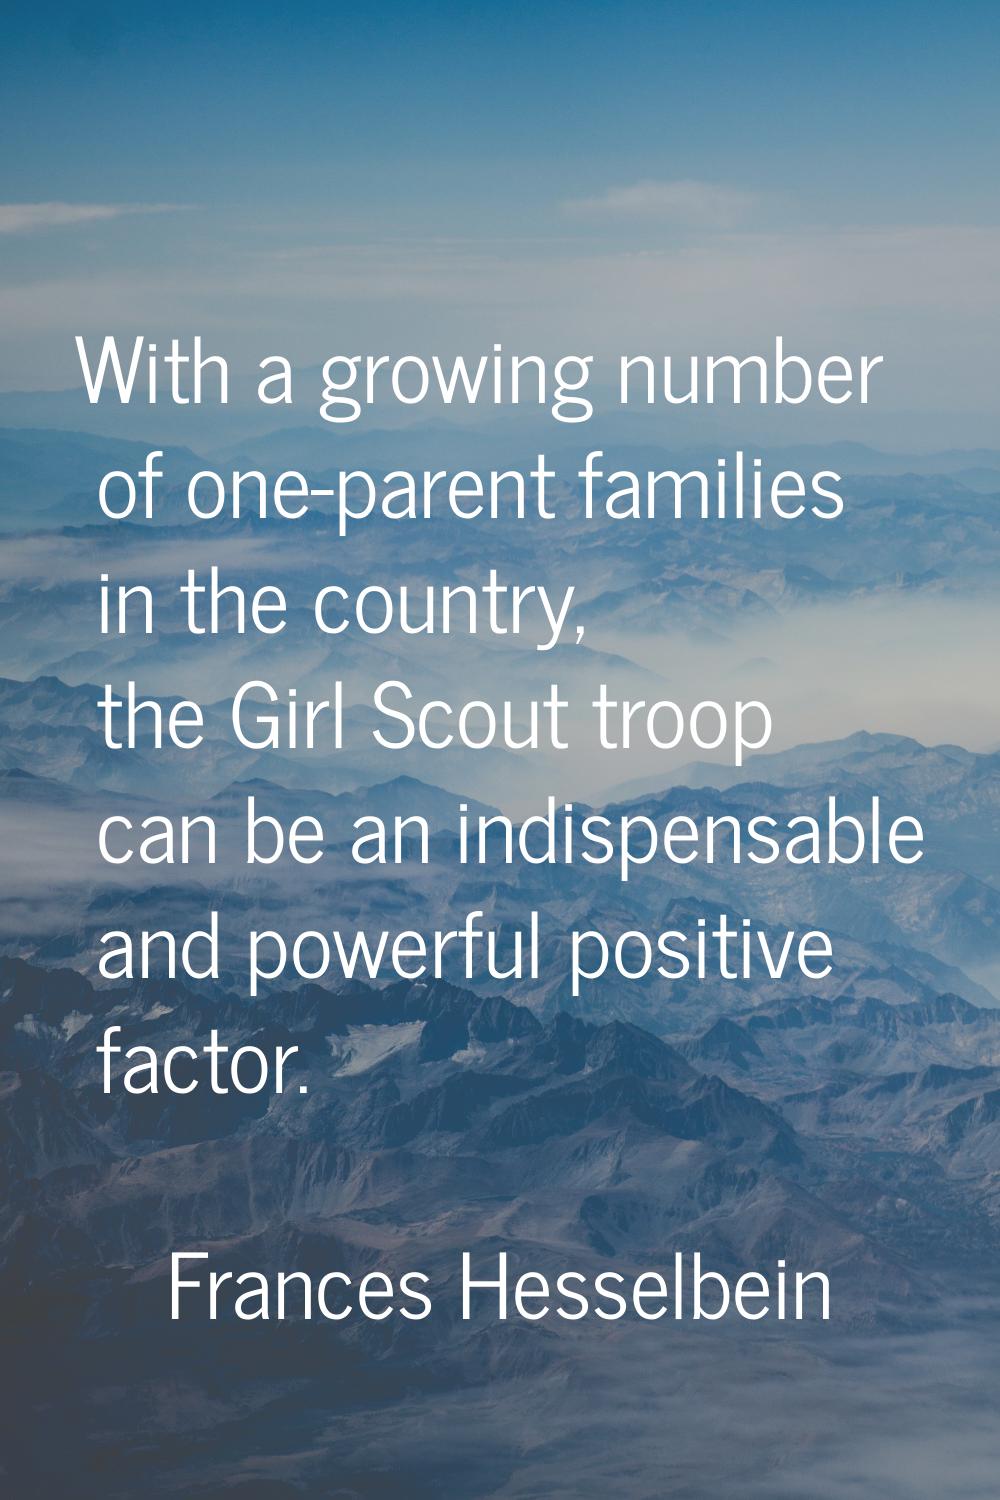 With a growing number of one-parent families in the country, the Girl Scout troop can be an indispe